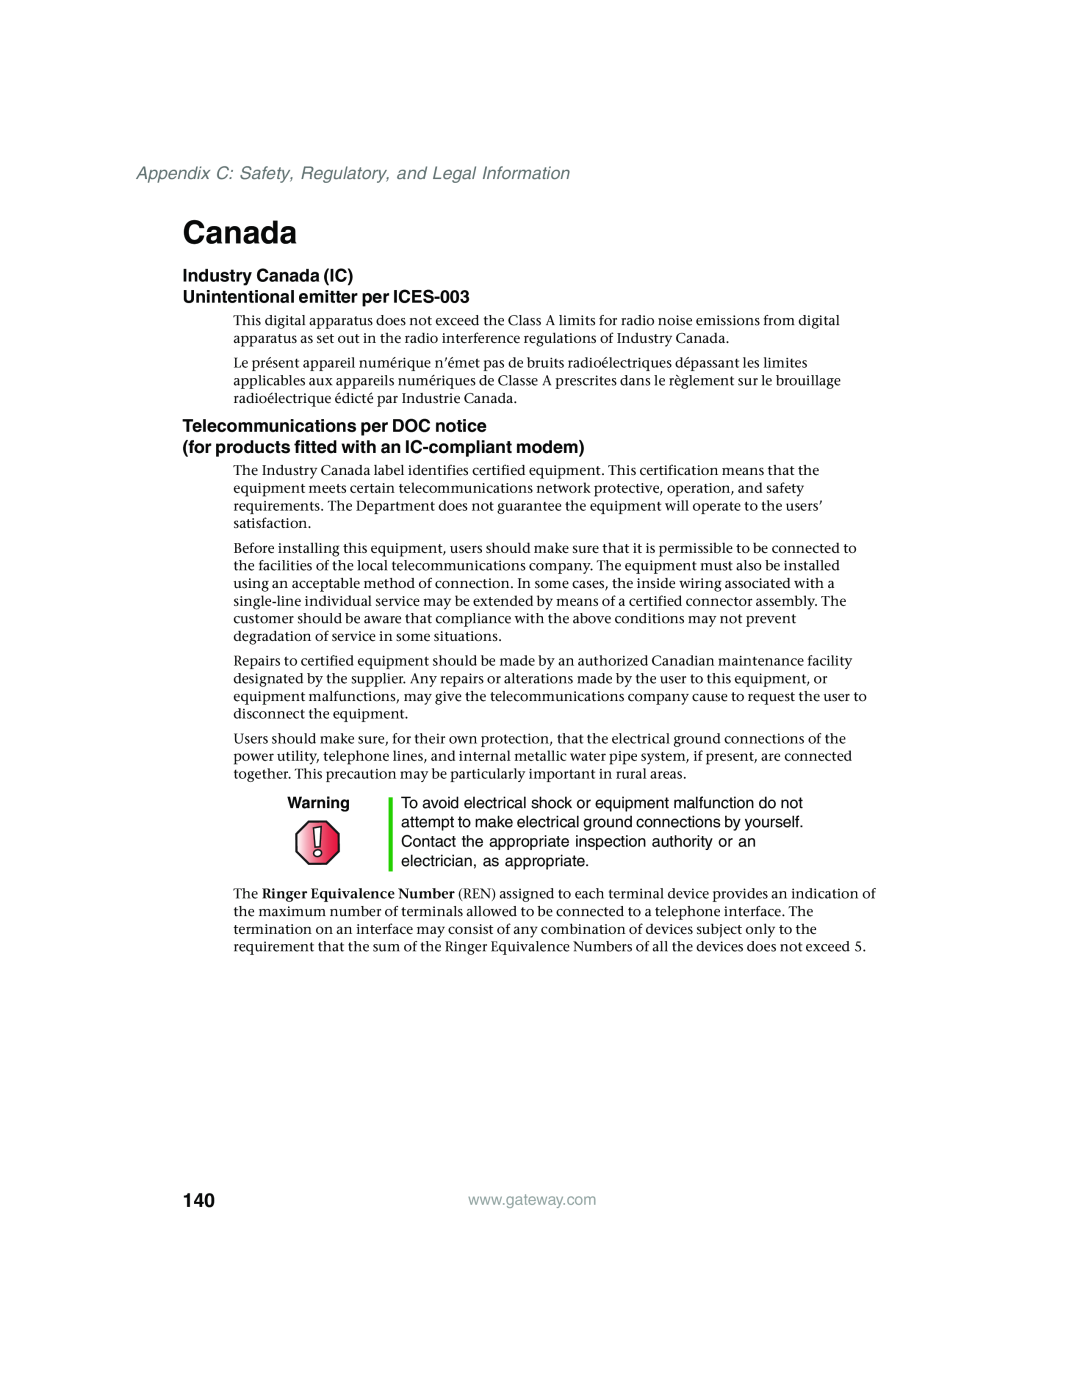 Gateway 960 manual Industry Canada IC Unintentional emitter per ICES-003, Telecommunications per DOC notice 